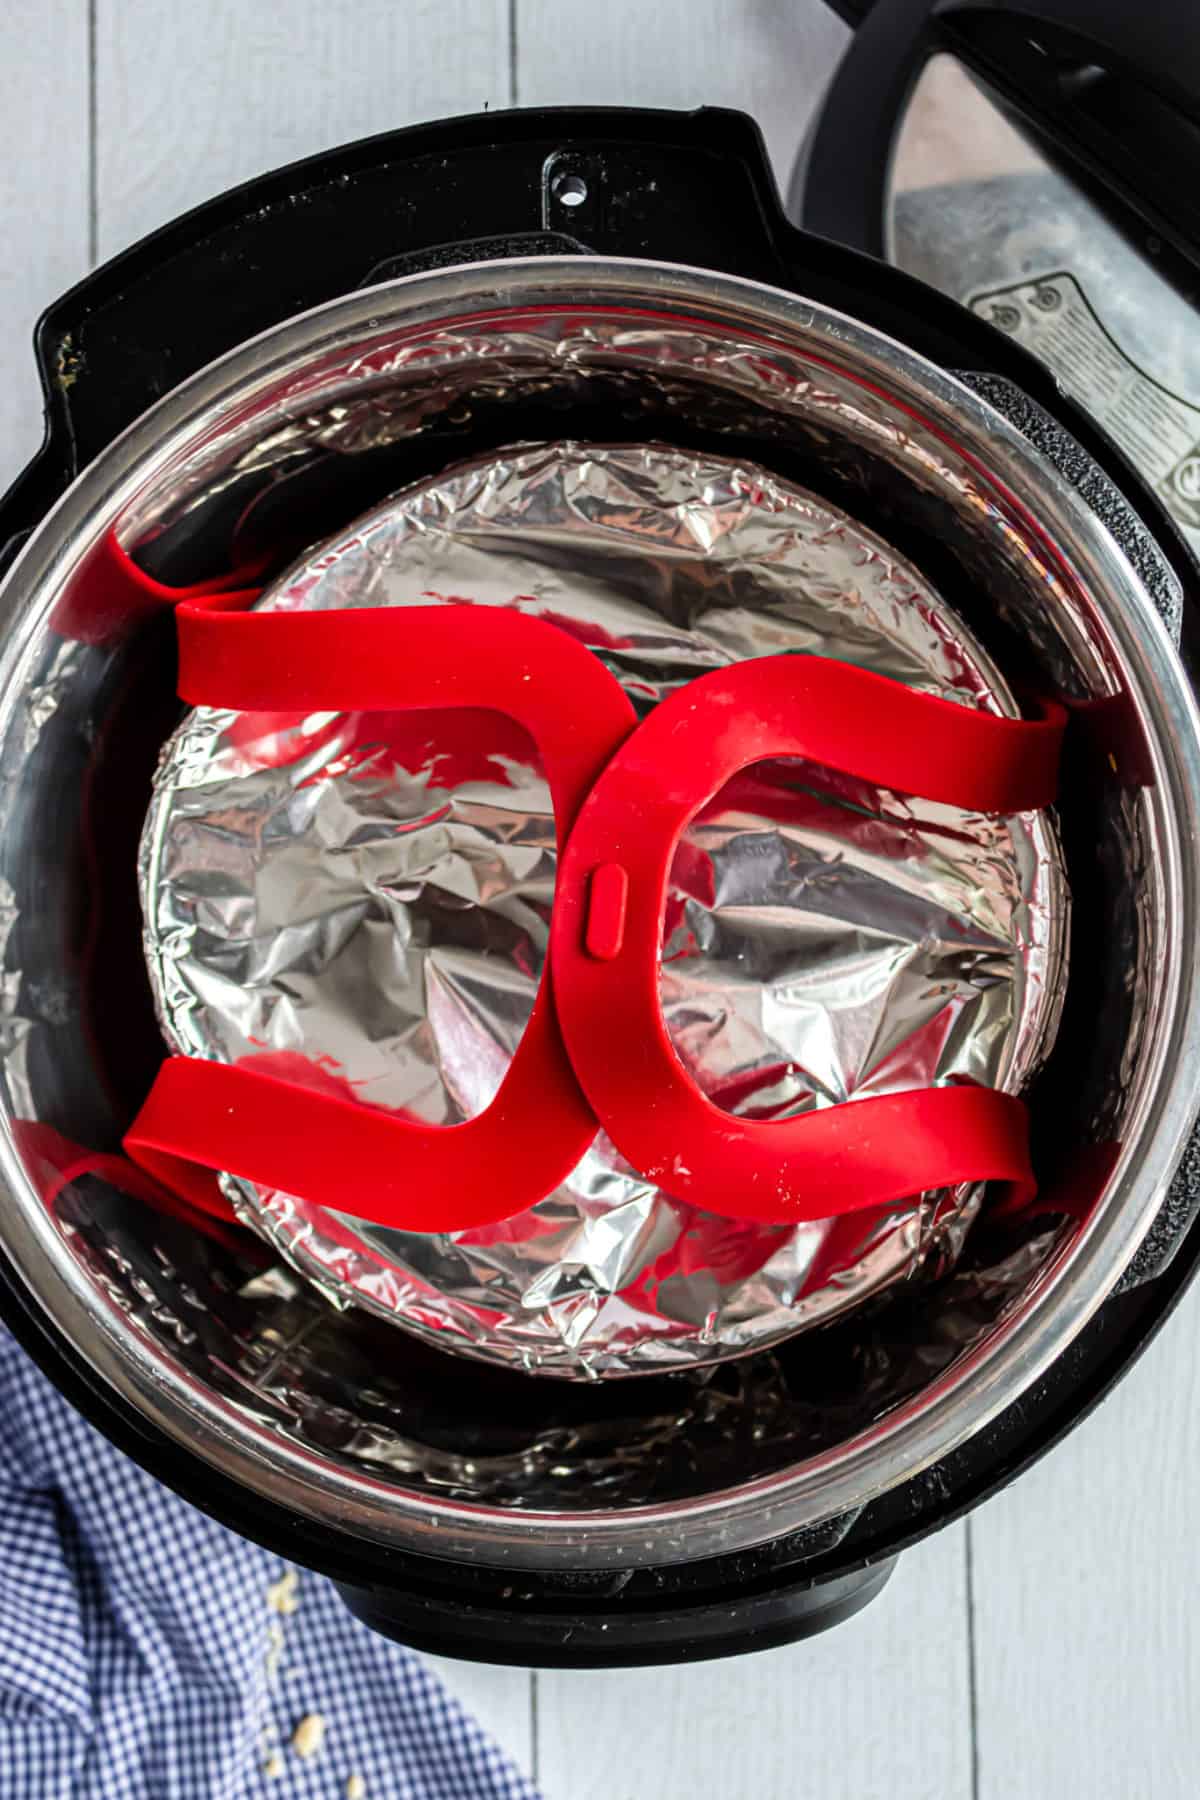 Peach cobbler wrapped in foil on a red sling inside a pressure cooker.